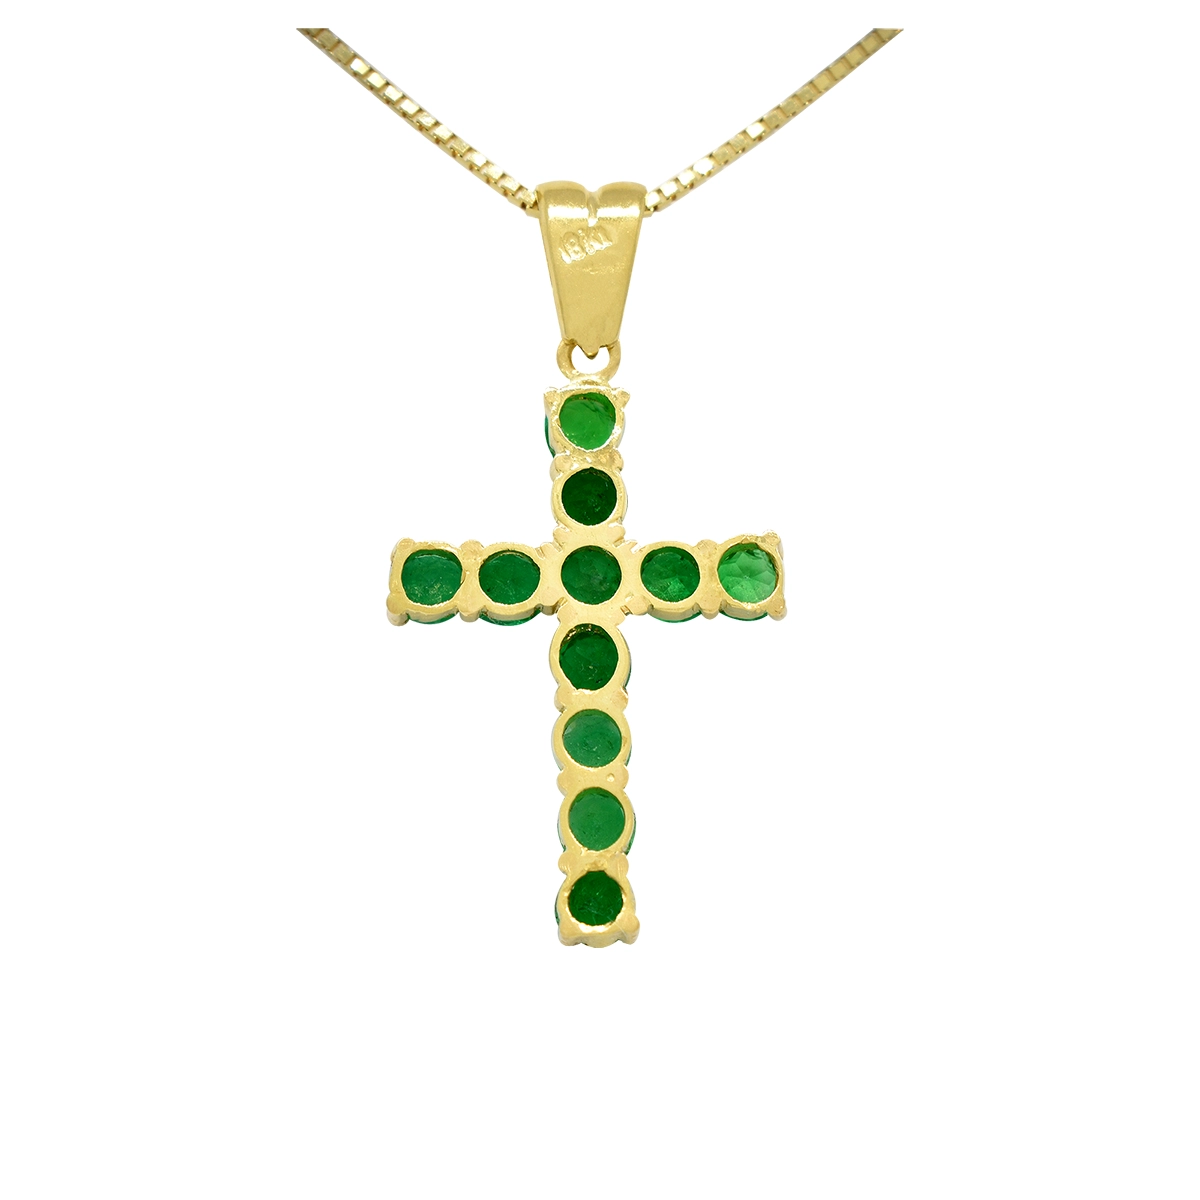 Solid 18K yellow gold cross pendant custom made for 11 round cut real Colombian emeralds in excellent quality